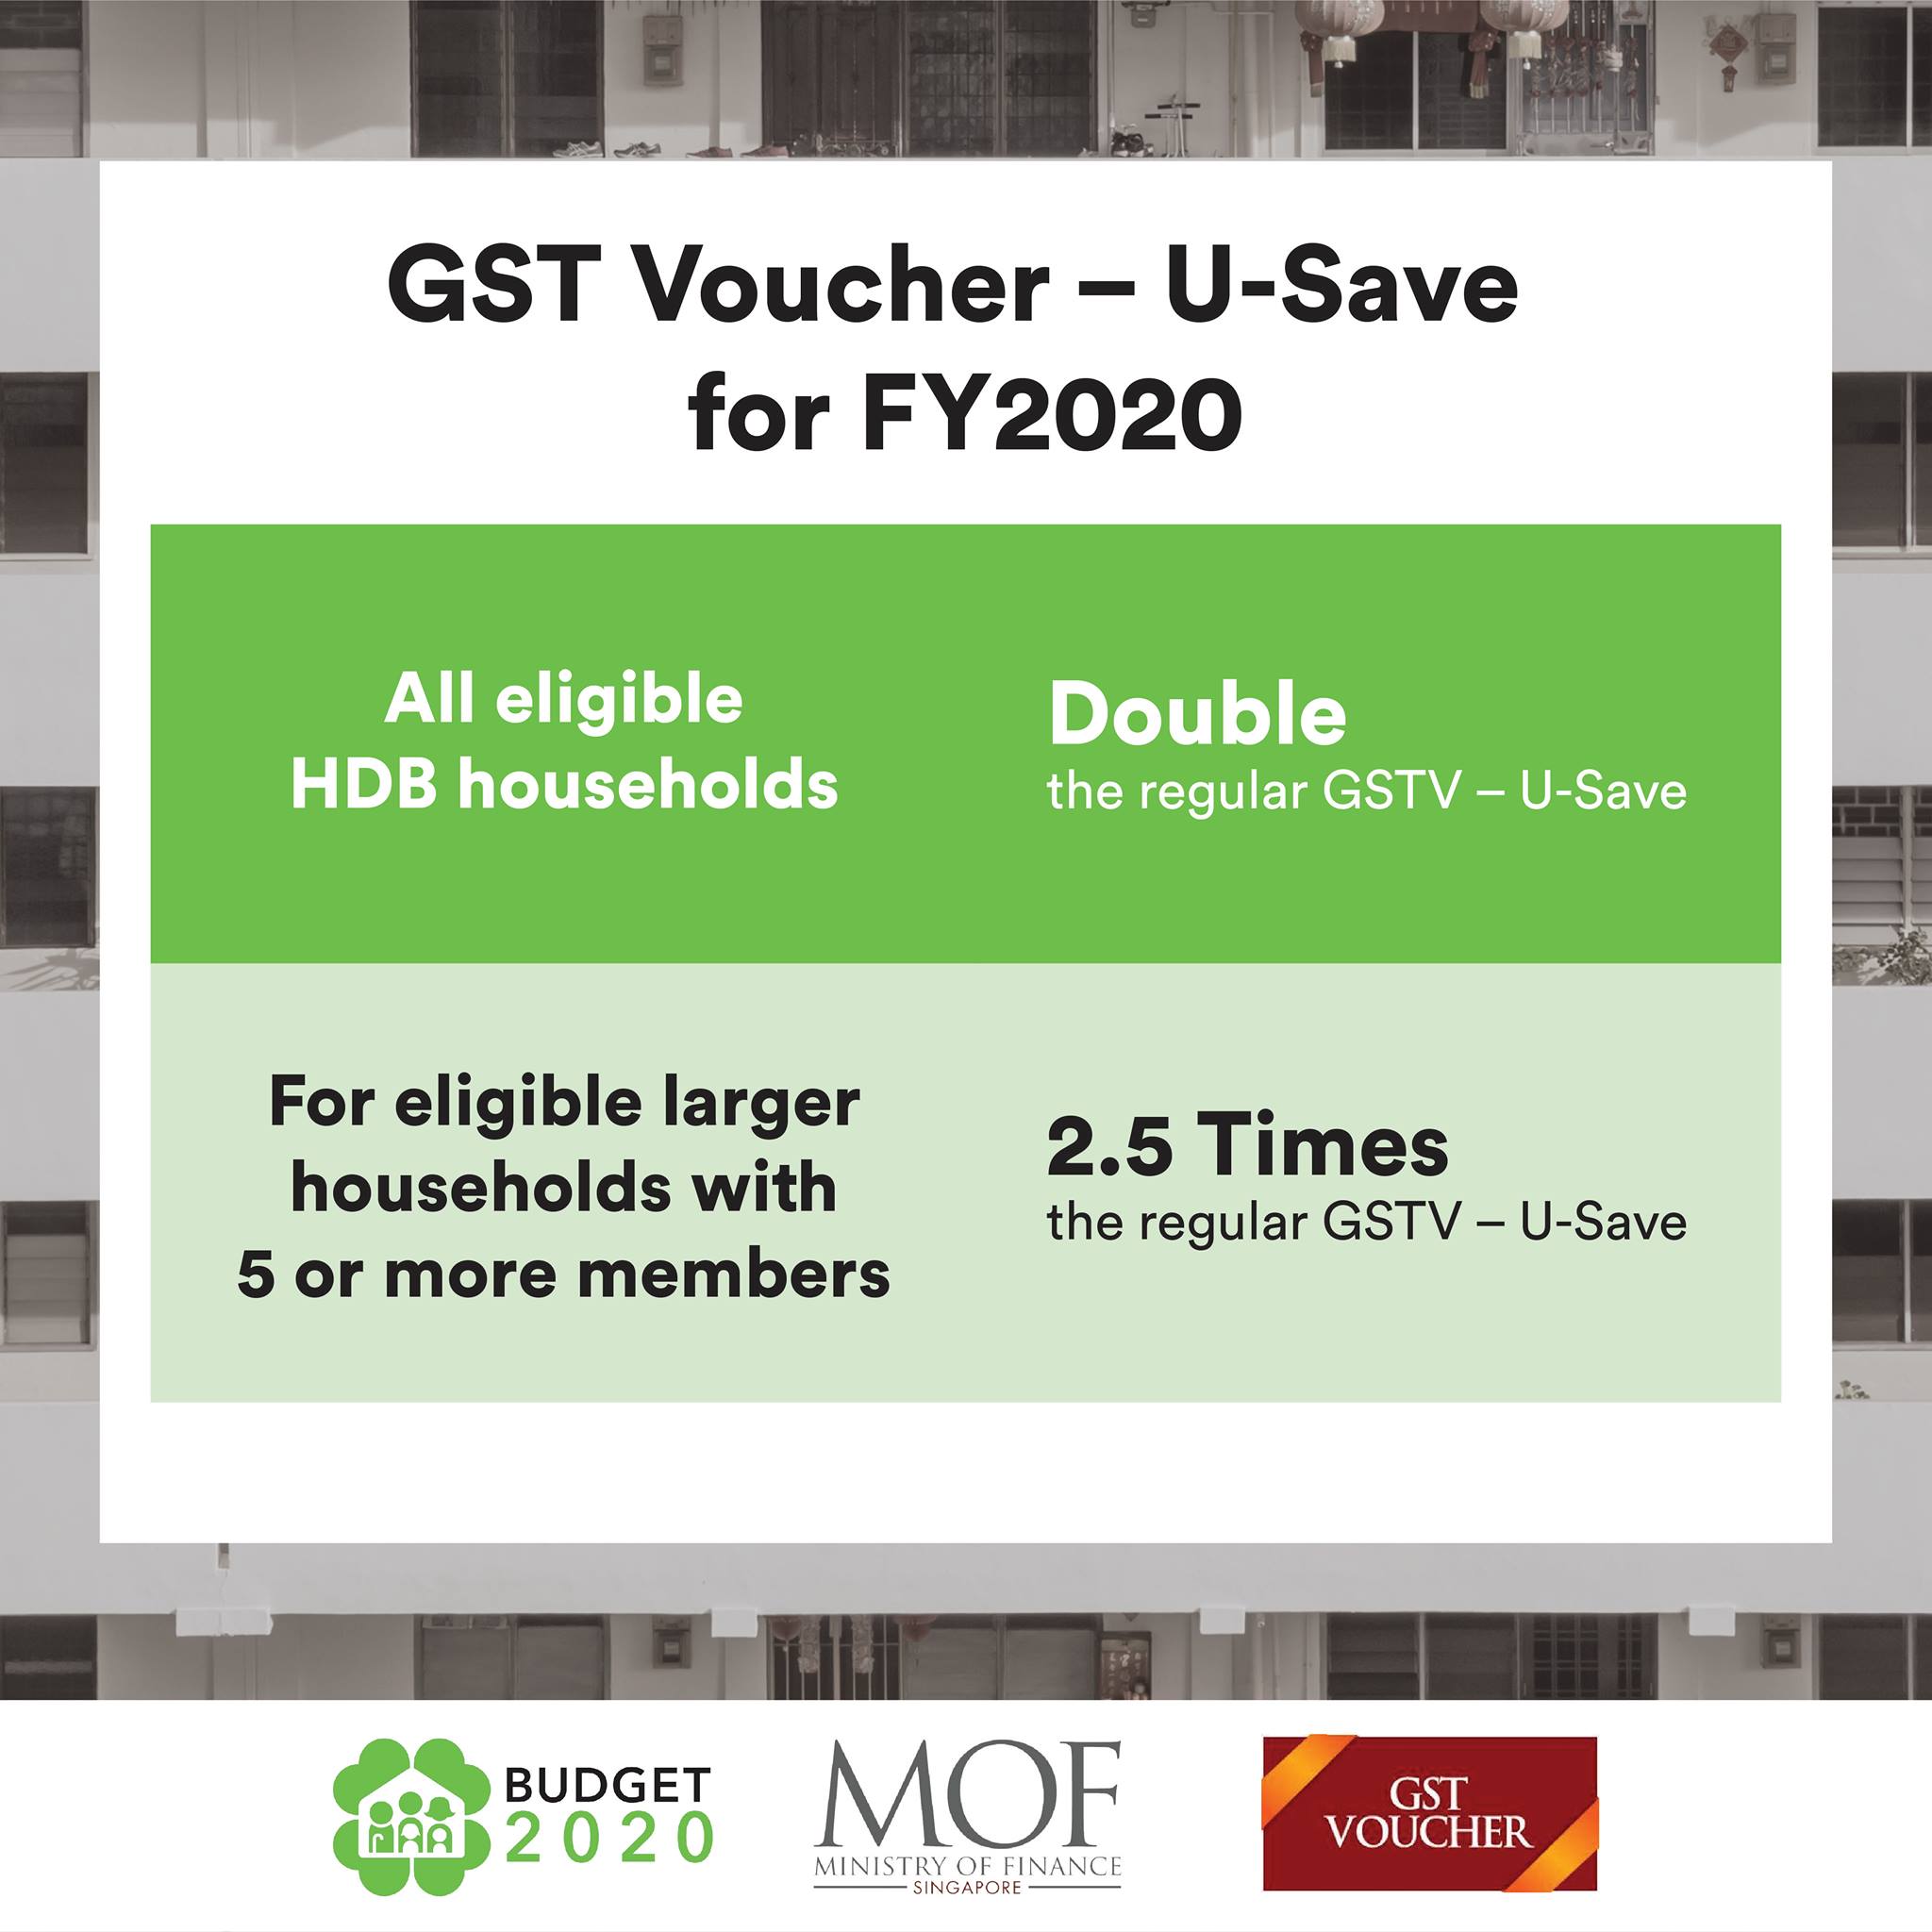 940-000-households-in-s-pore-will-receive-double-their-regular-gst